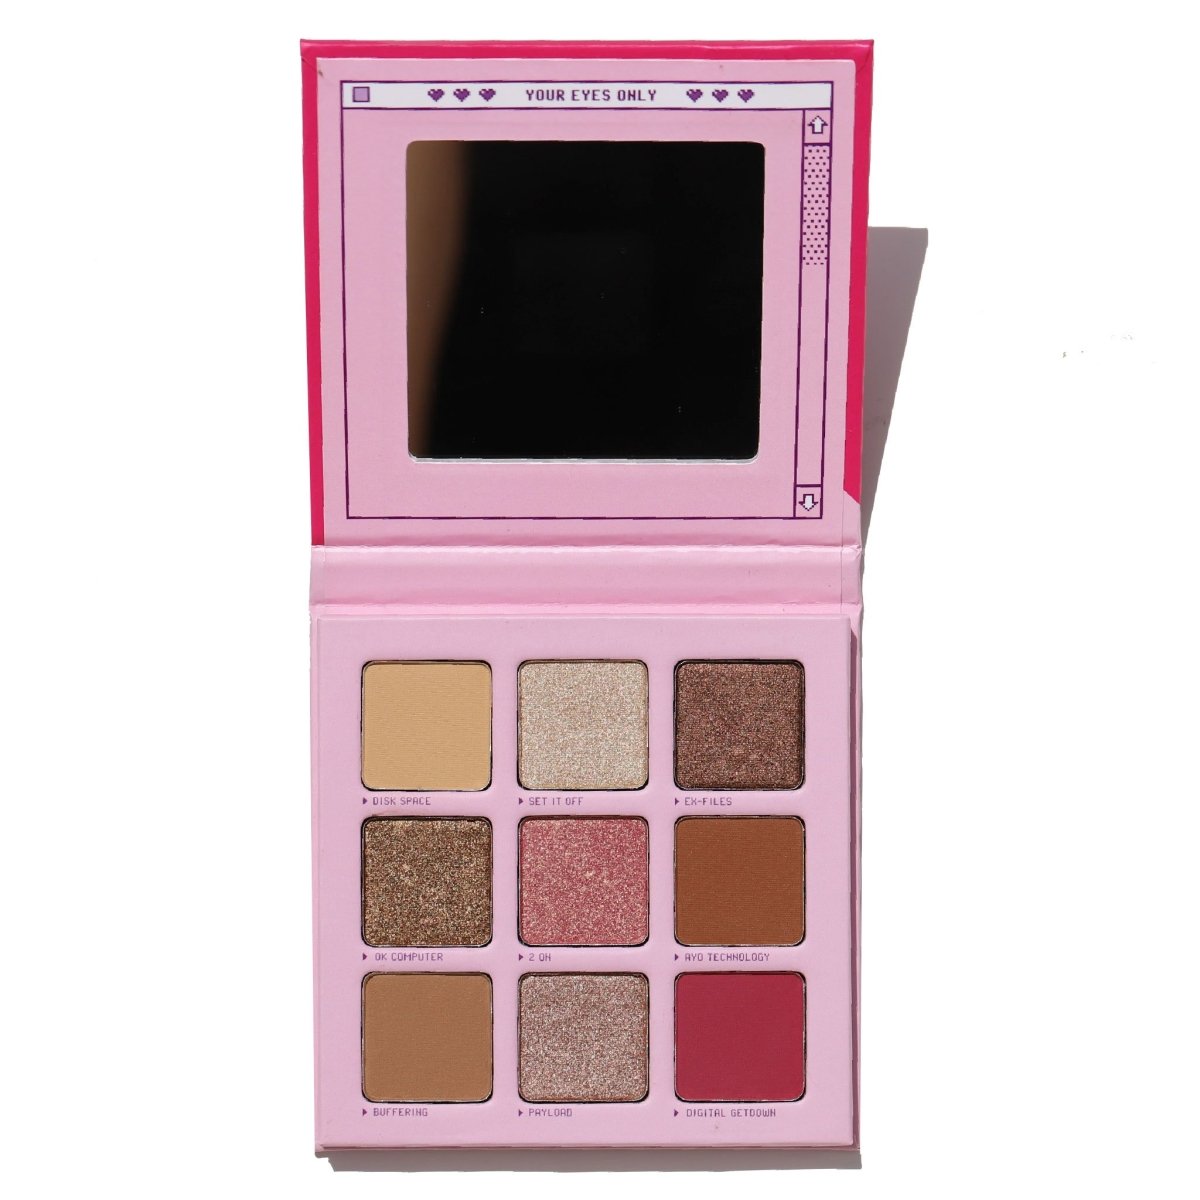 Your Eyes Only Eyeshadow Palette - half caked makeup